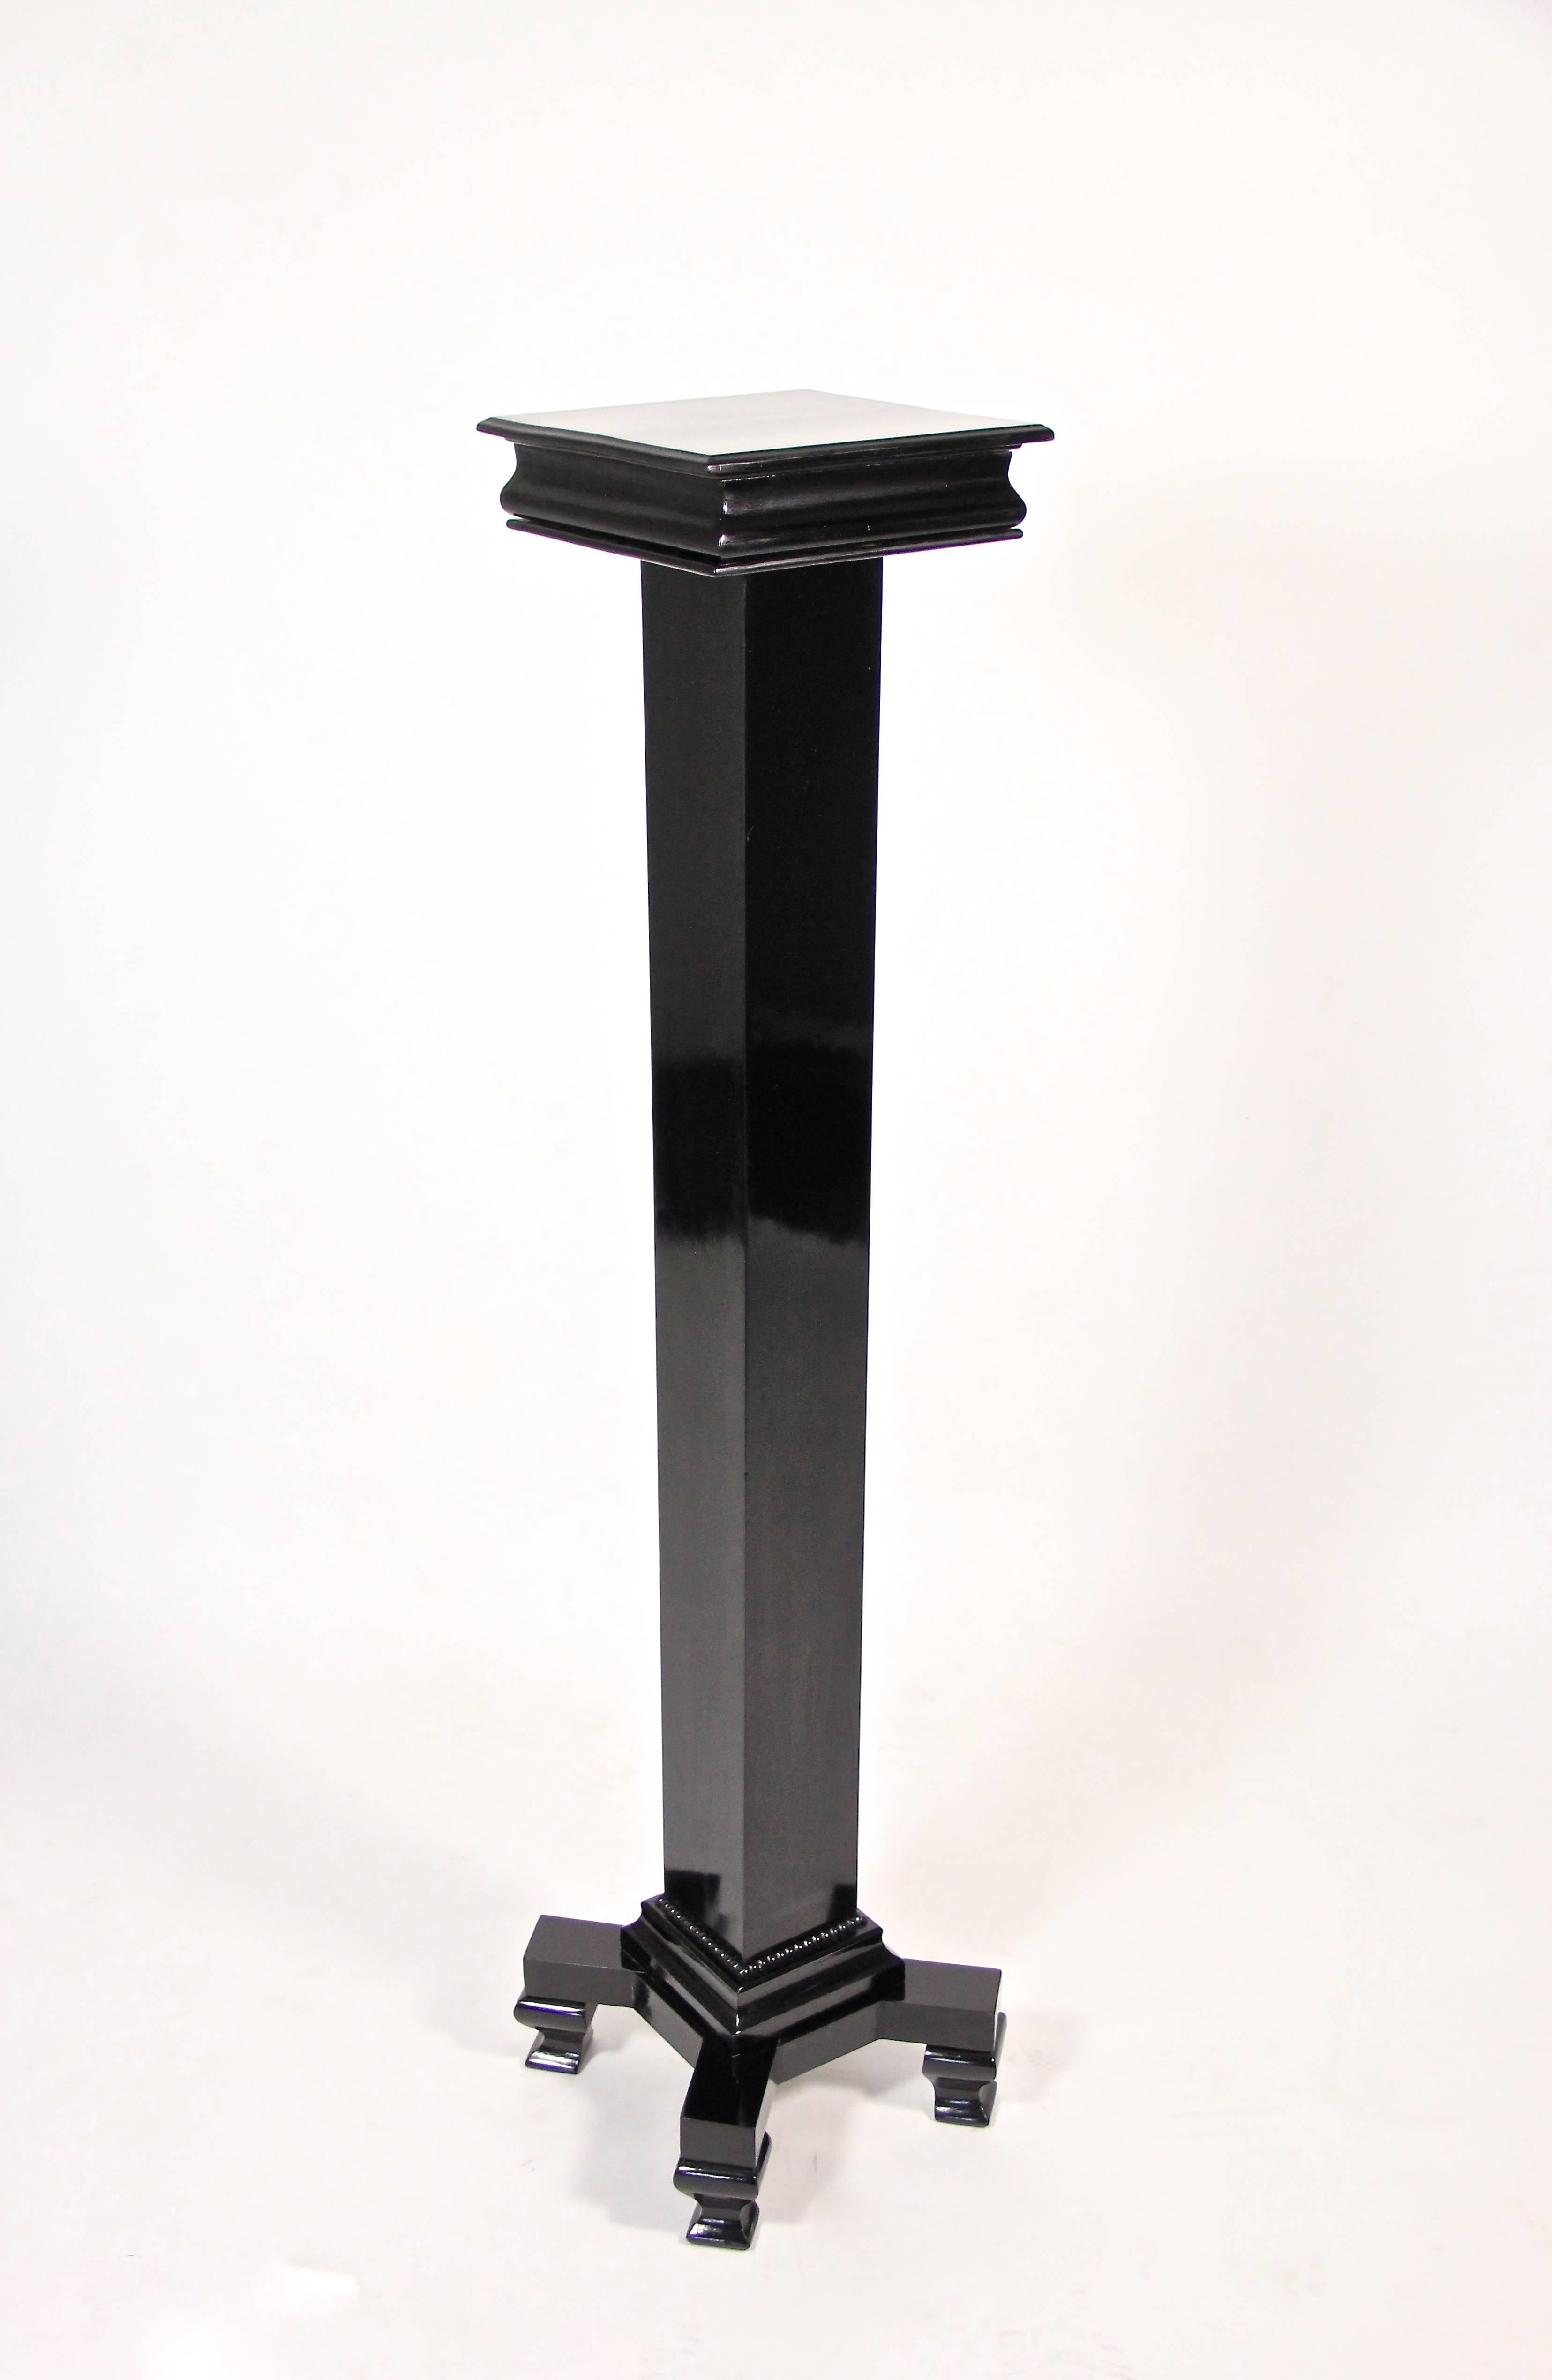 Stunning Art Deco pedestal from circa 1920 in Austria made of fine fruitwood. Ebonized and finished with a fantastic handmade shellac polish, this pedestal impresses with a straight architectural design. Reduced to clear lines, typical for the Art